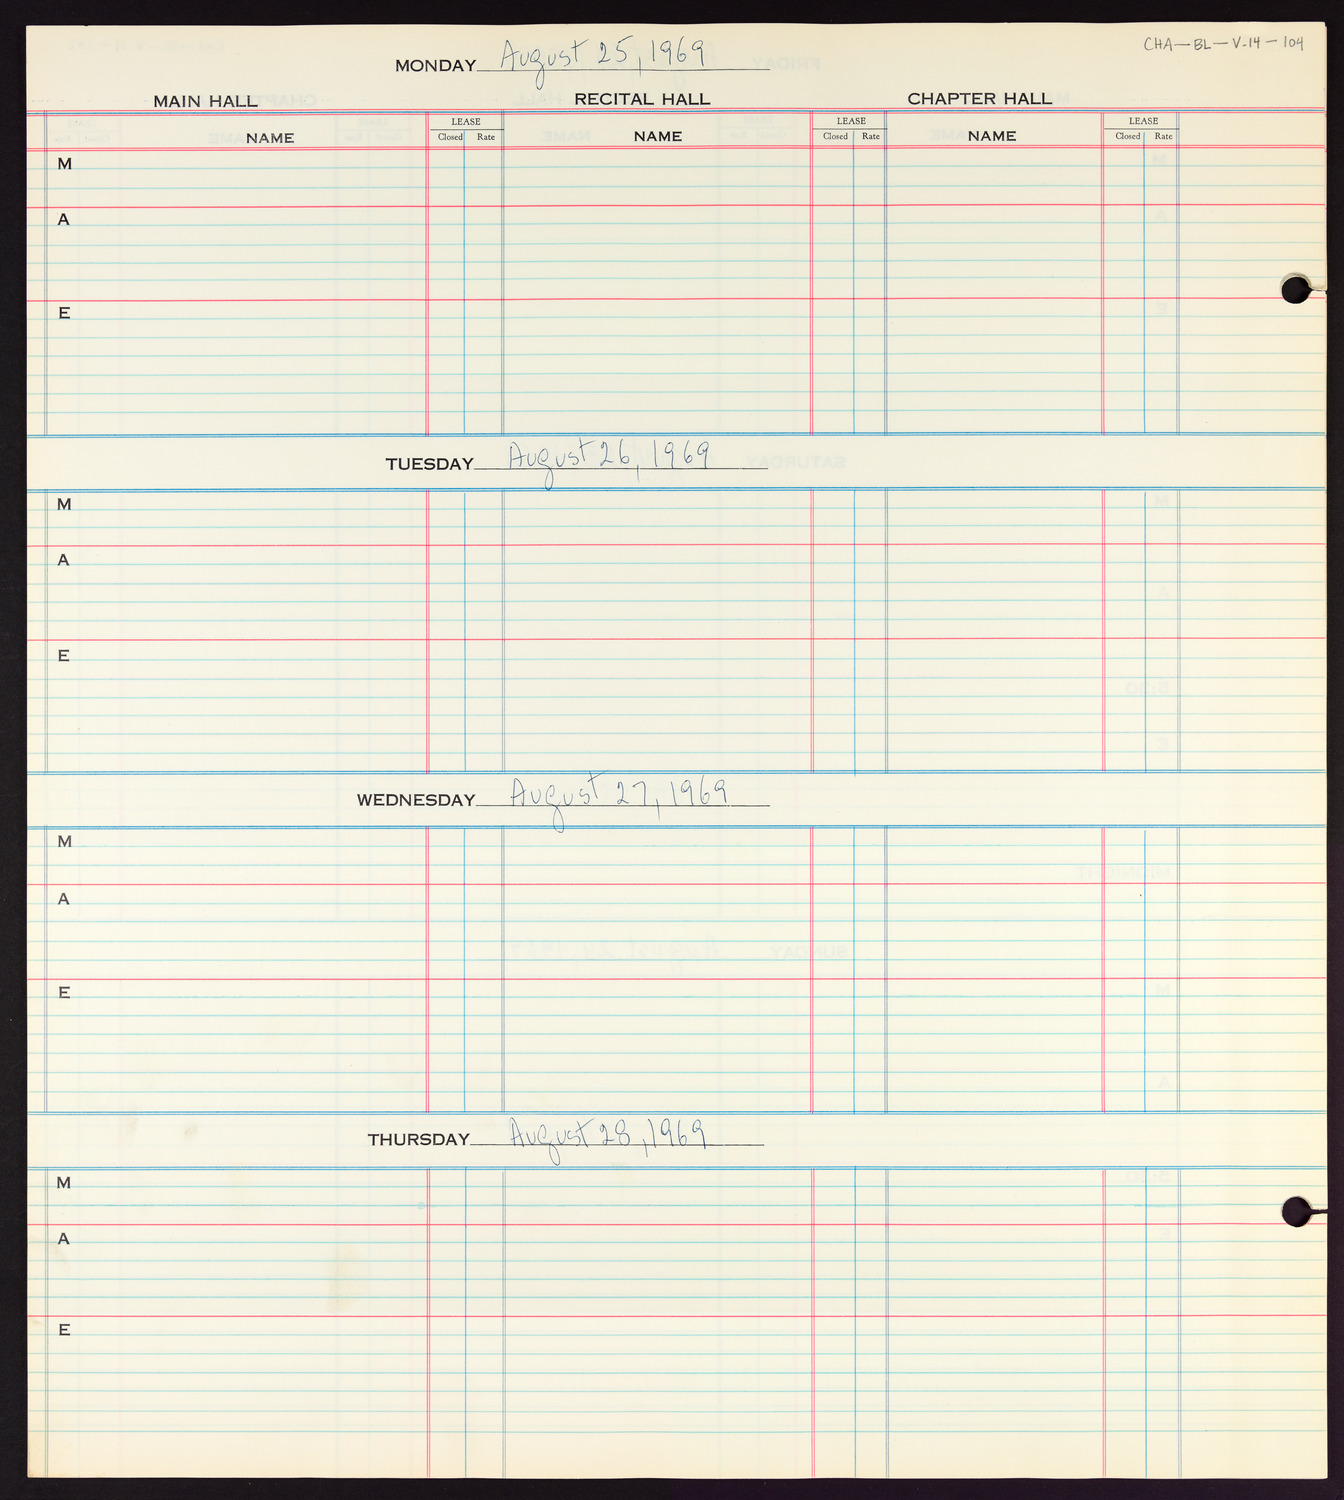 Carnegie Hall Booking Ledger, volume 14, page 104